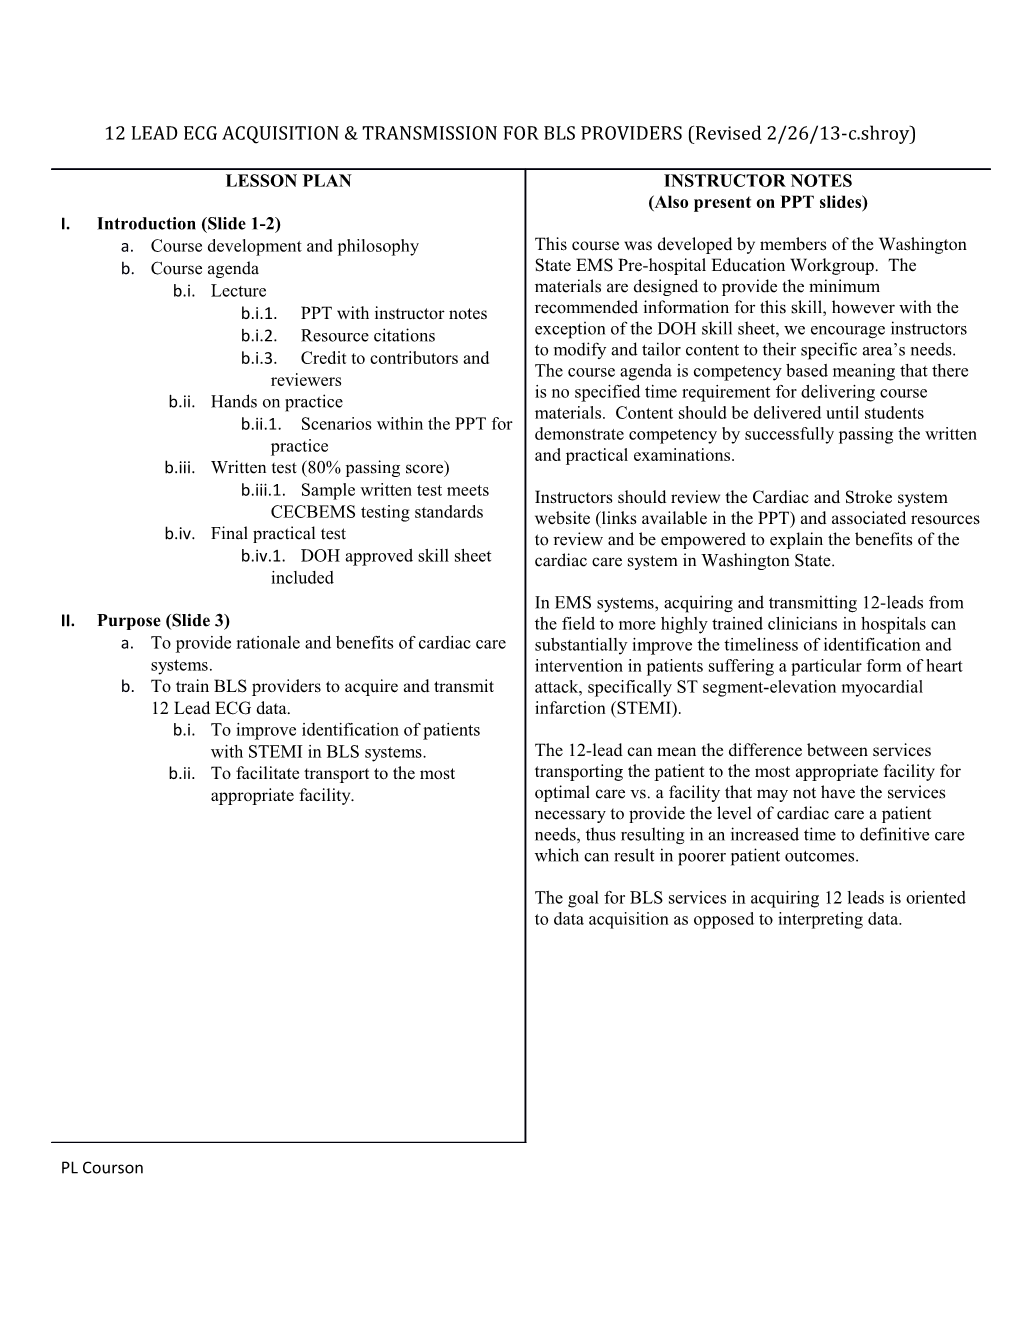 12 LEAD ECG ACQUISITION & TRANSMISSION for BLS PROVIDERS (Revised 2/26/13-C.Shroy)